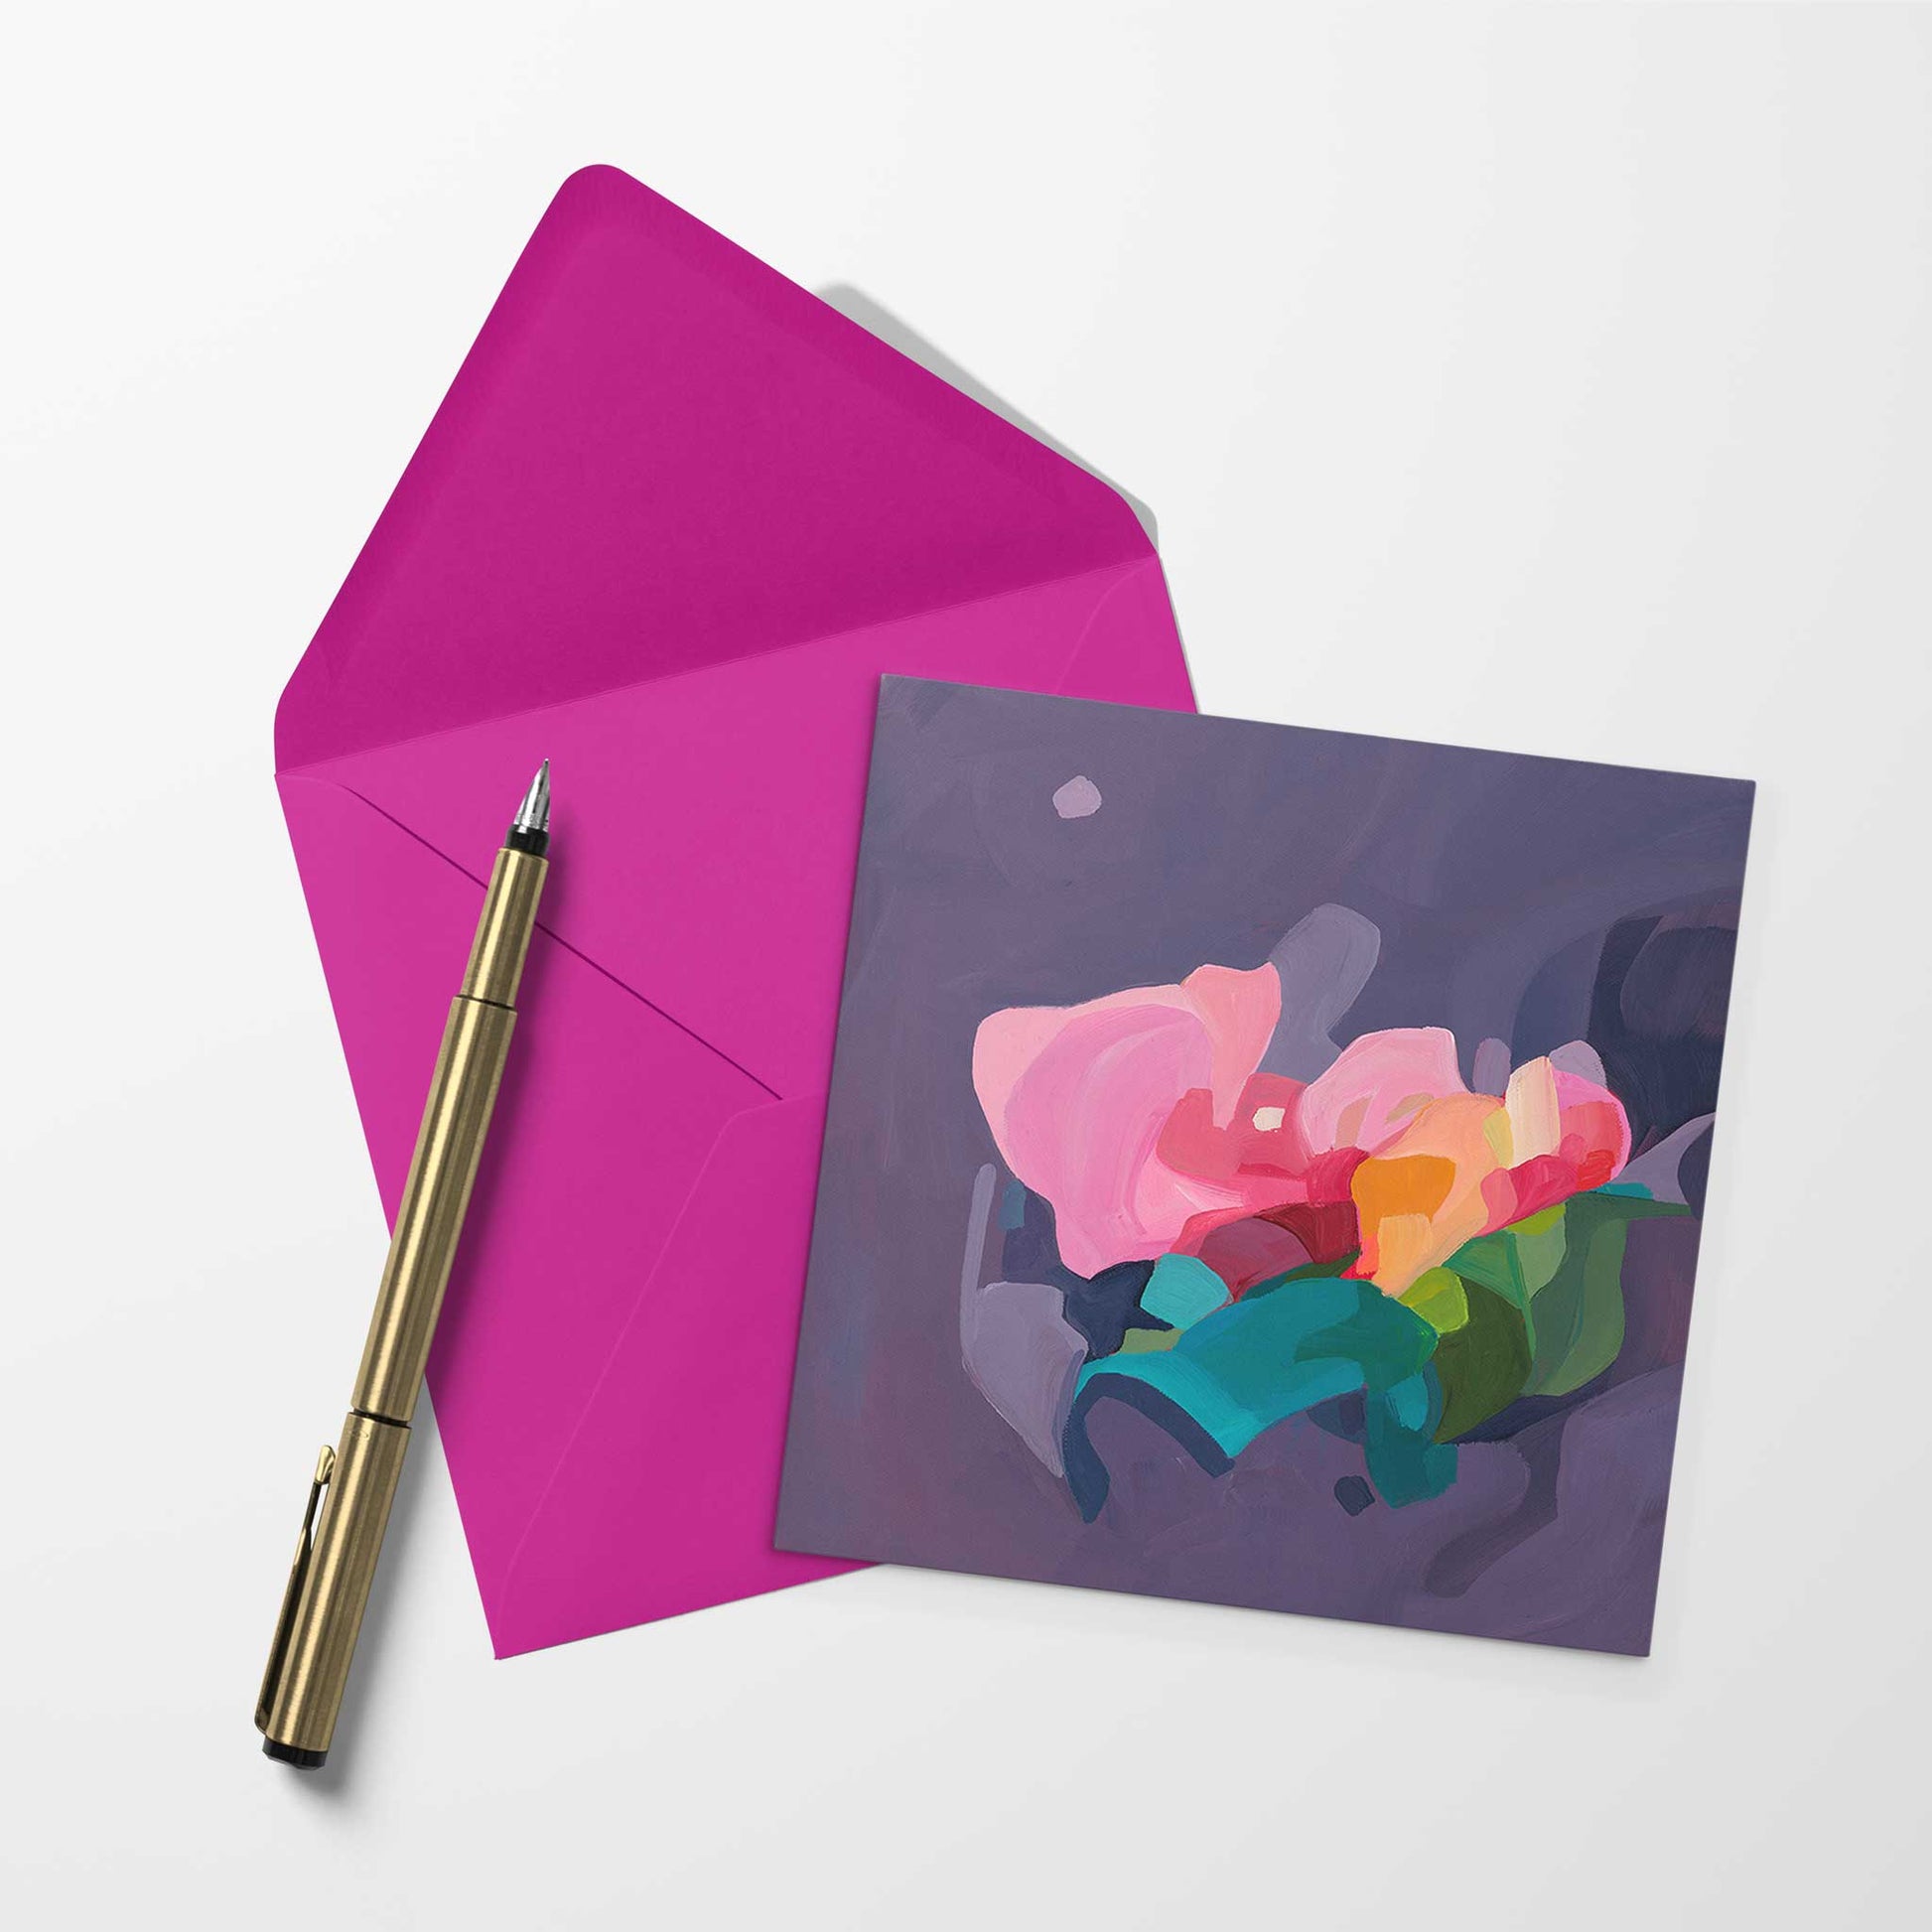 blank art card with purple abstract artwork and fuschia envelope